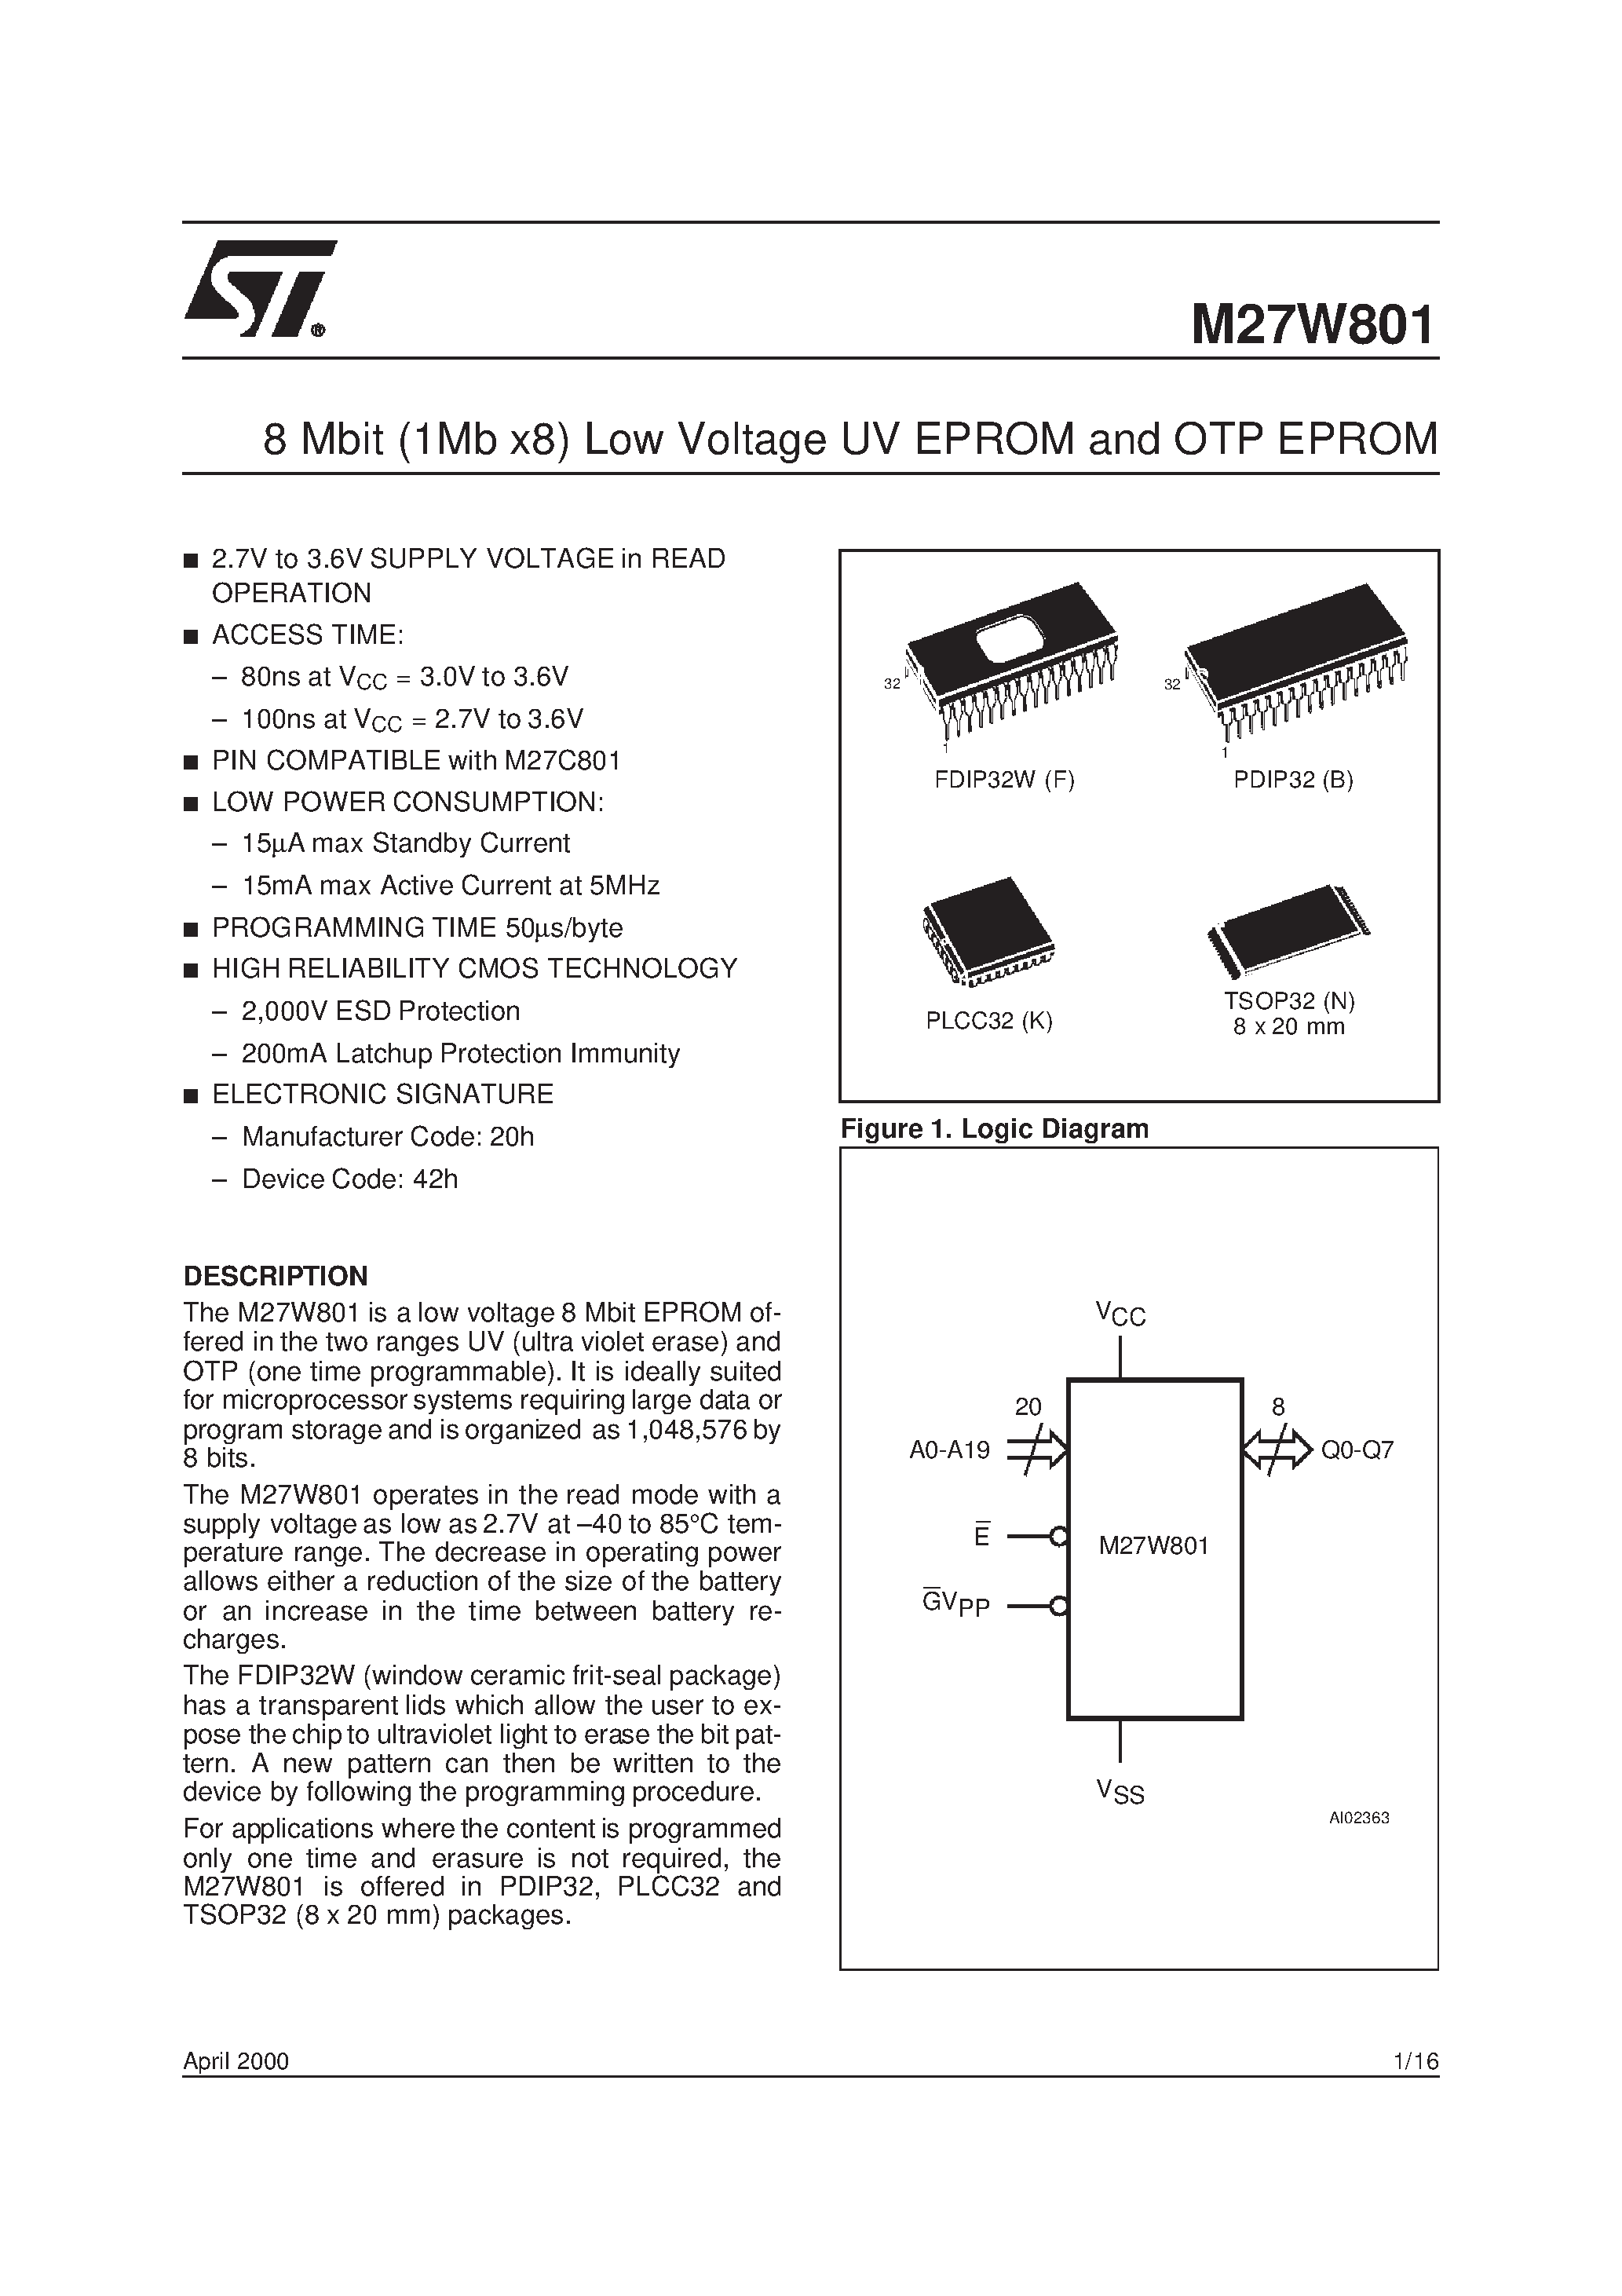 Datasheet M27W801-100N6TR - 8 Mbit 1Mb x8 Low Voltage UV EPROM and OTP EPROM page 1